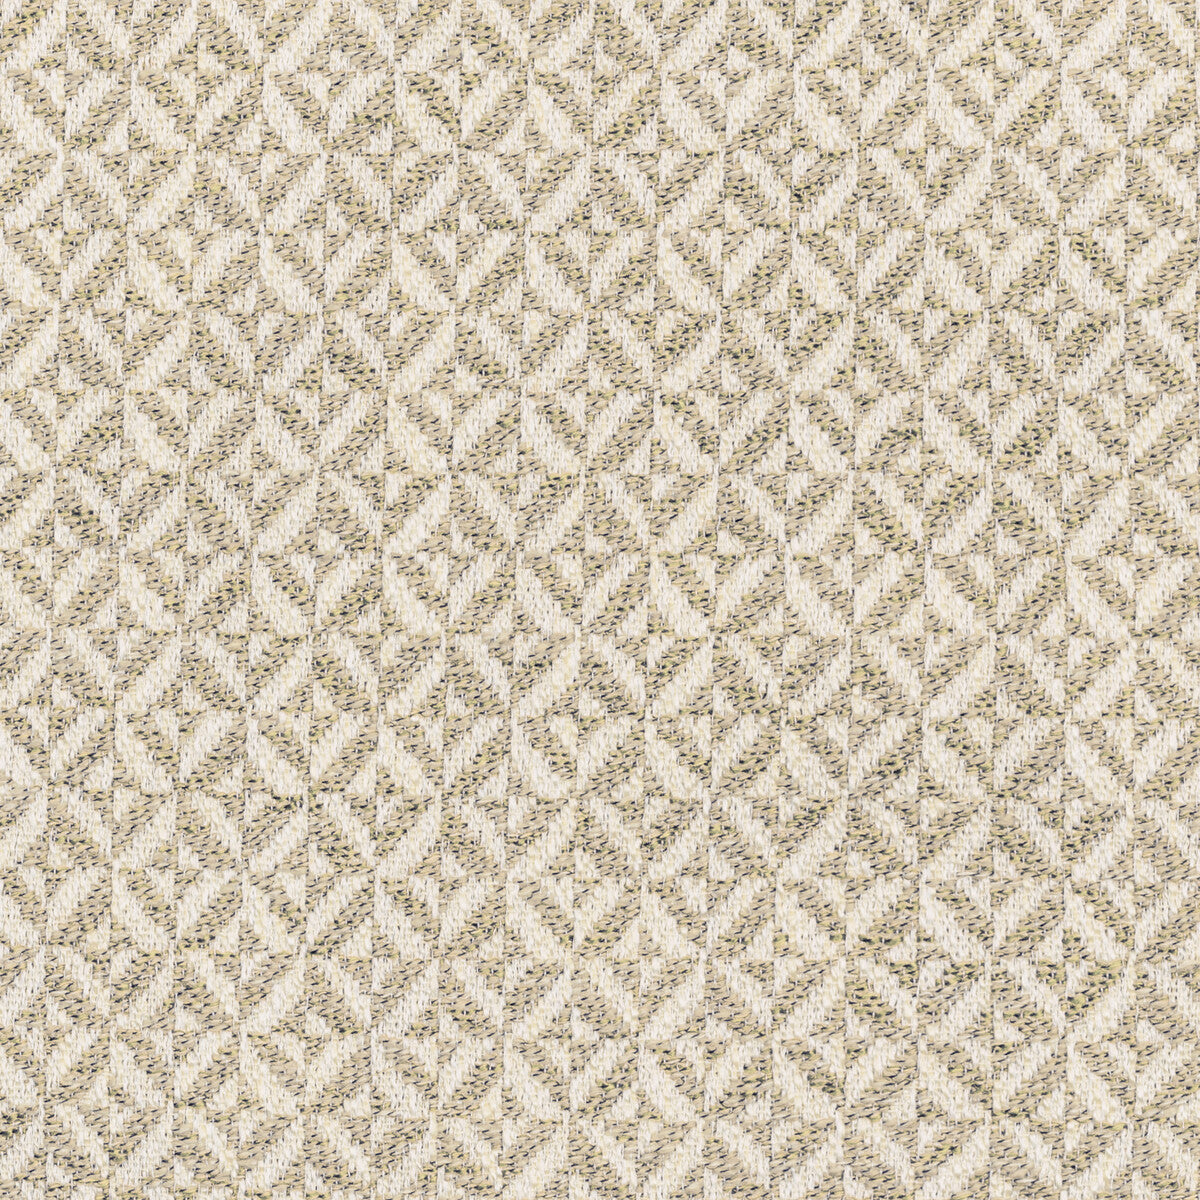 Triana Weave fabric in moss color - pattern 2021105.3.0 - by Lee Jofa in the Triana Weaves collection